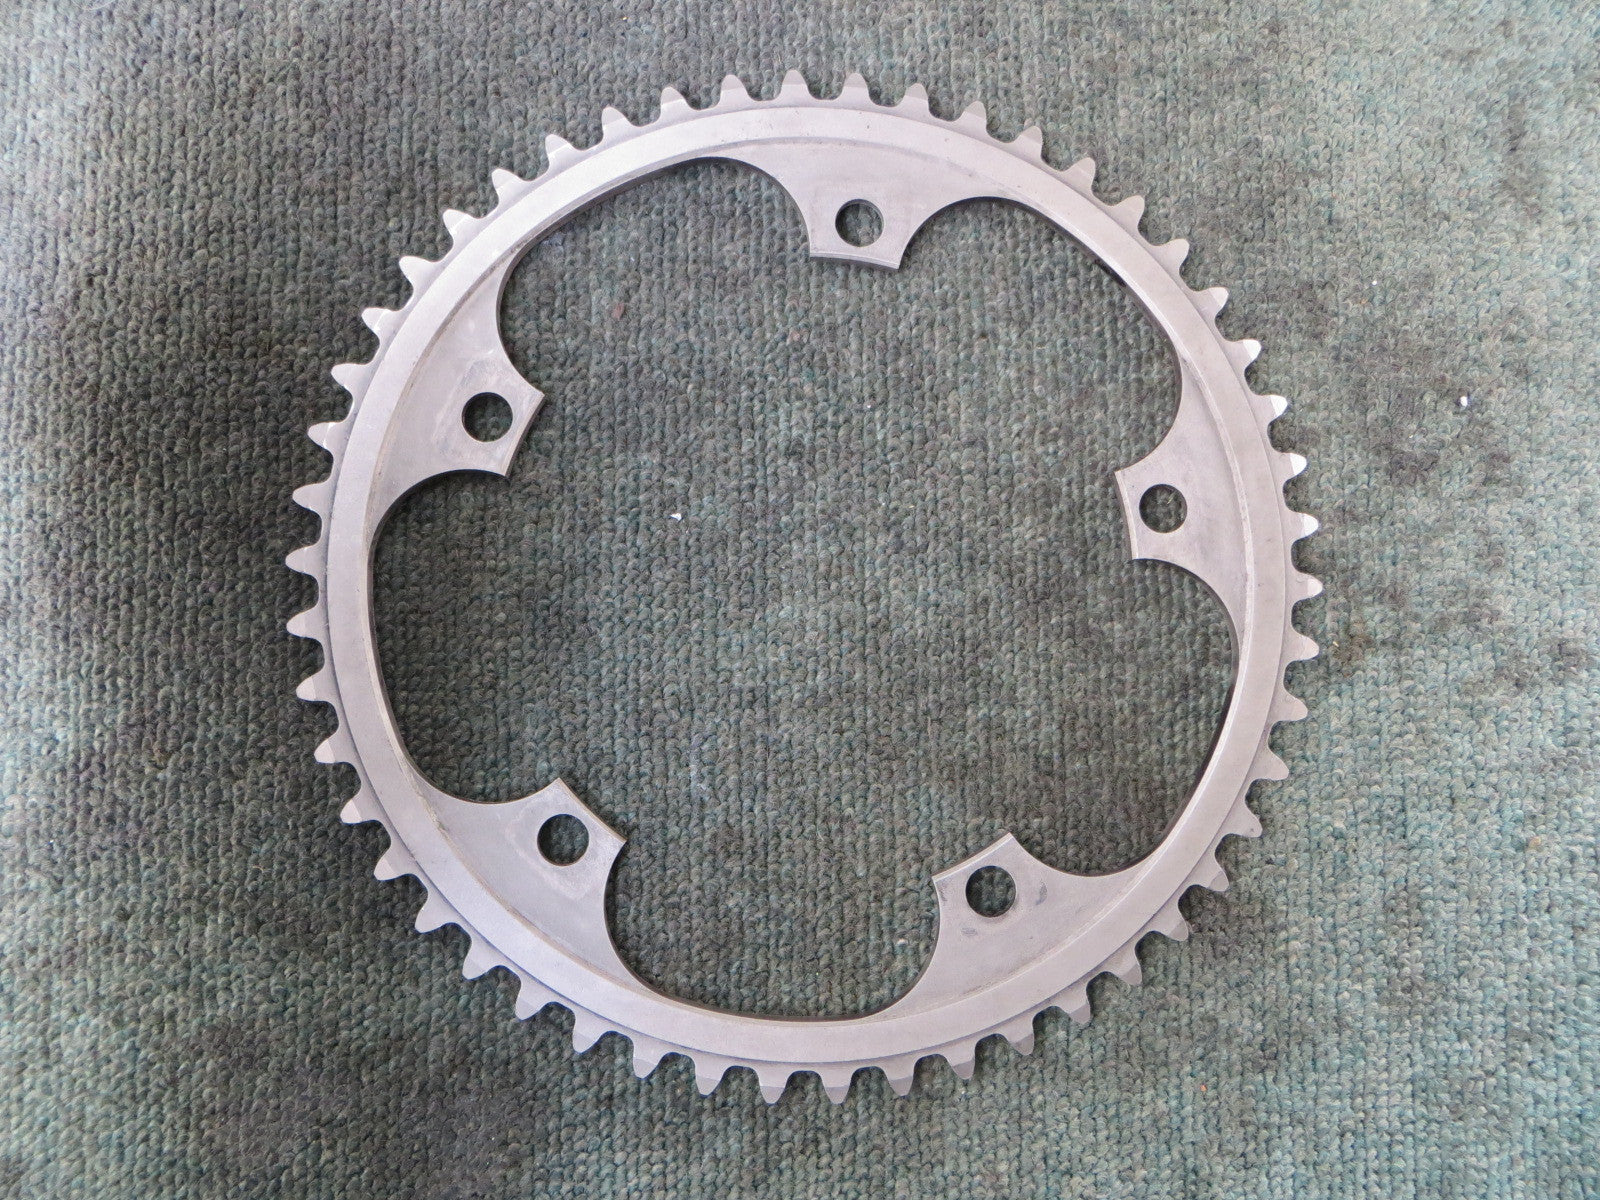 Sugino S-cubic Matte Finish 1/8" 144BCD NJS Chainring 50T (17031806)